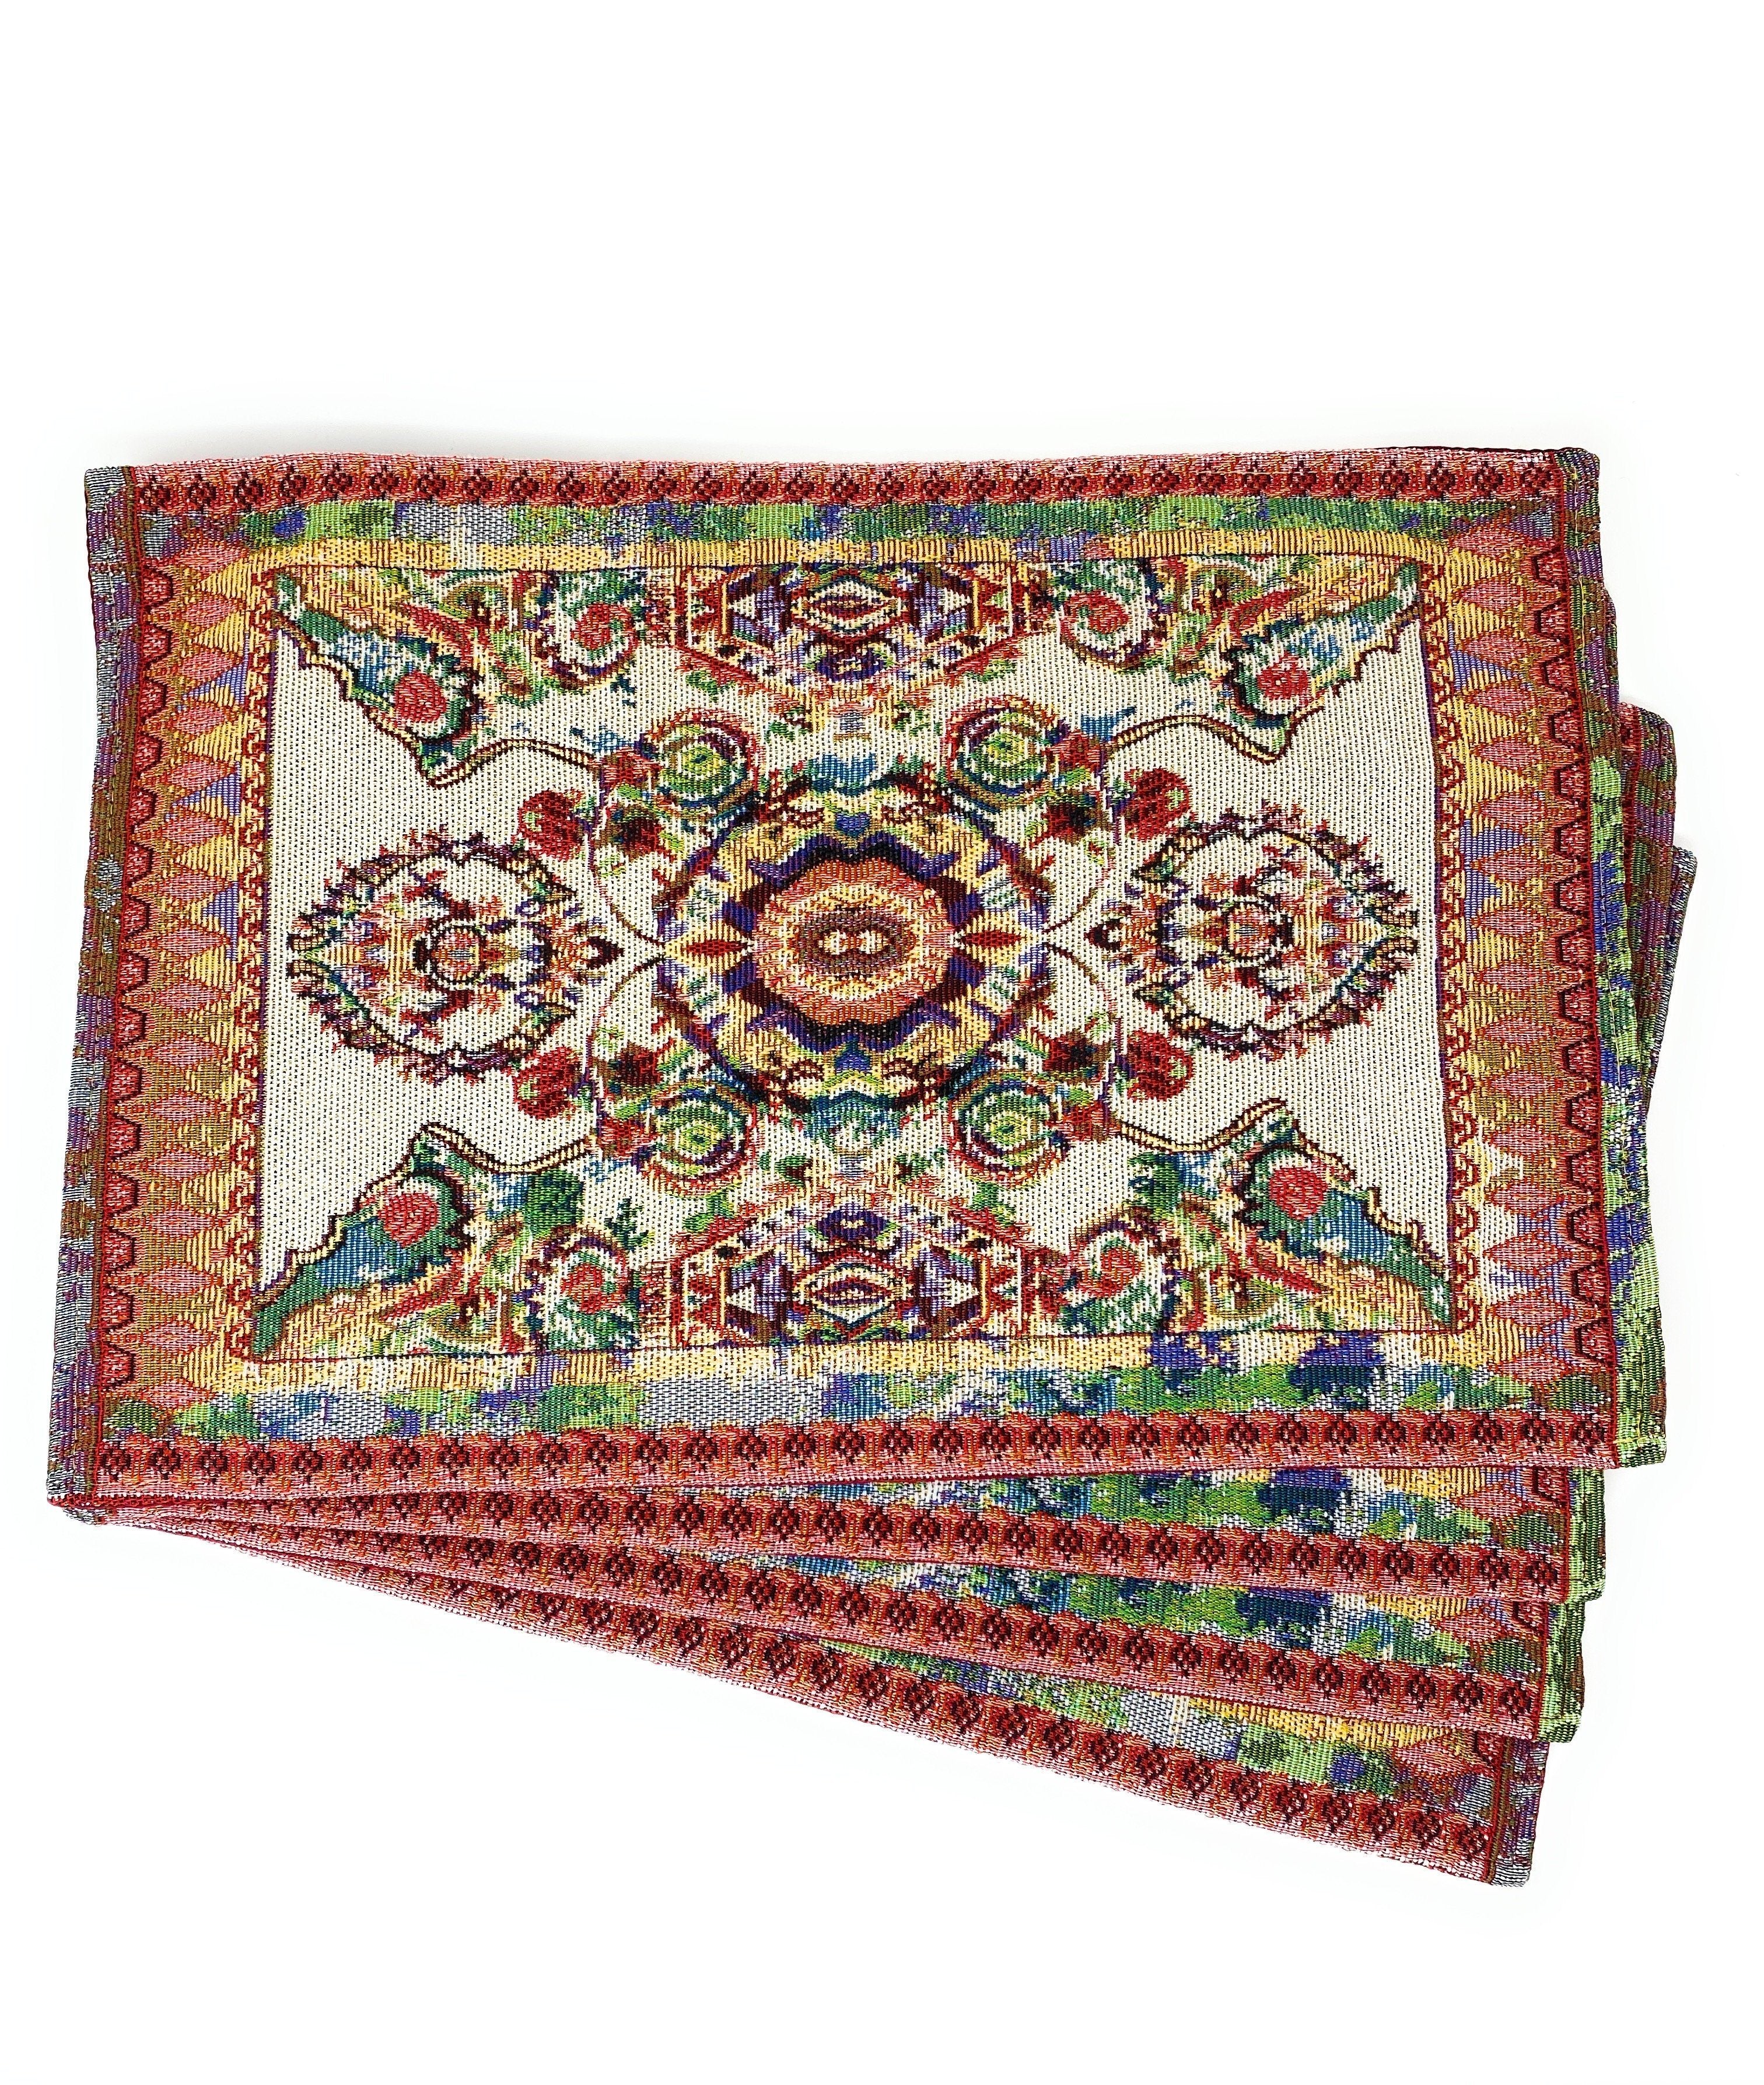 Tache Elegant Coral Colorful Ornate Paisley Woven Tapestry Placemat Set (18193) - Tache Home Fashion